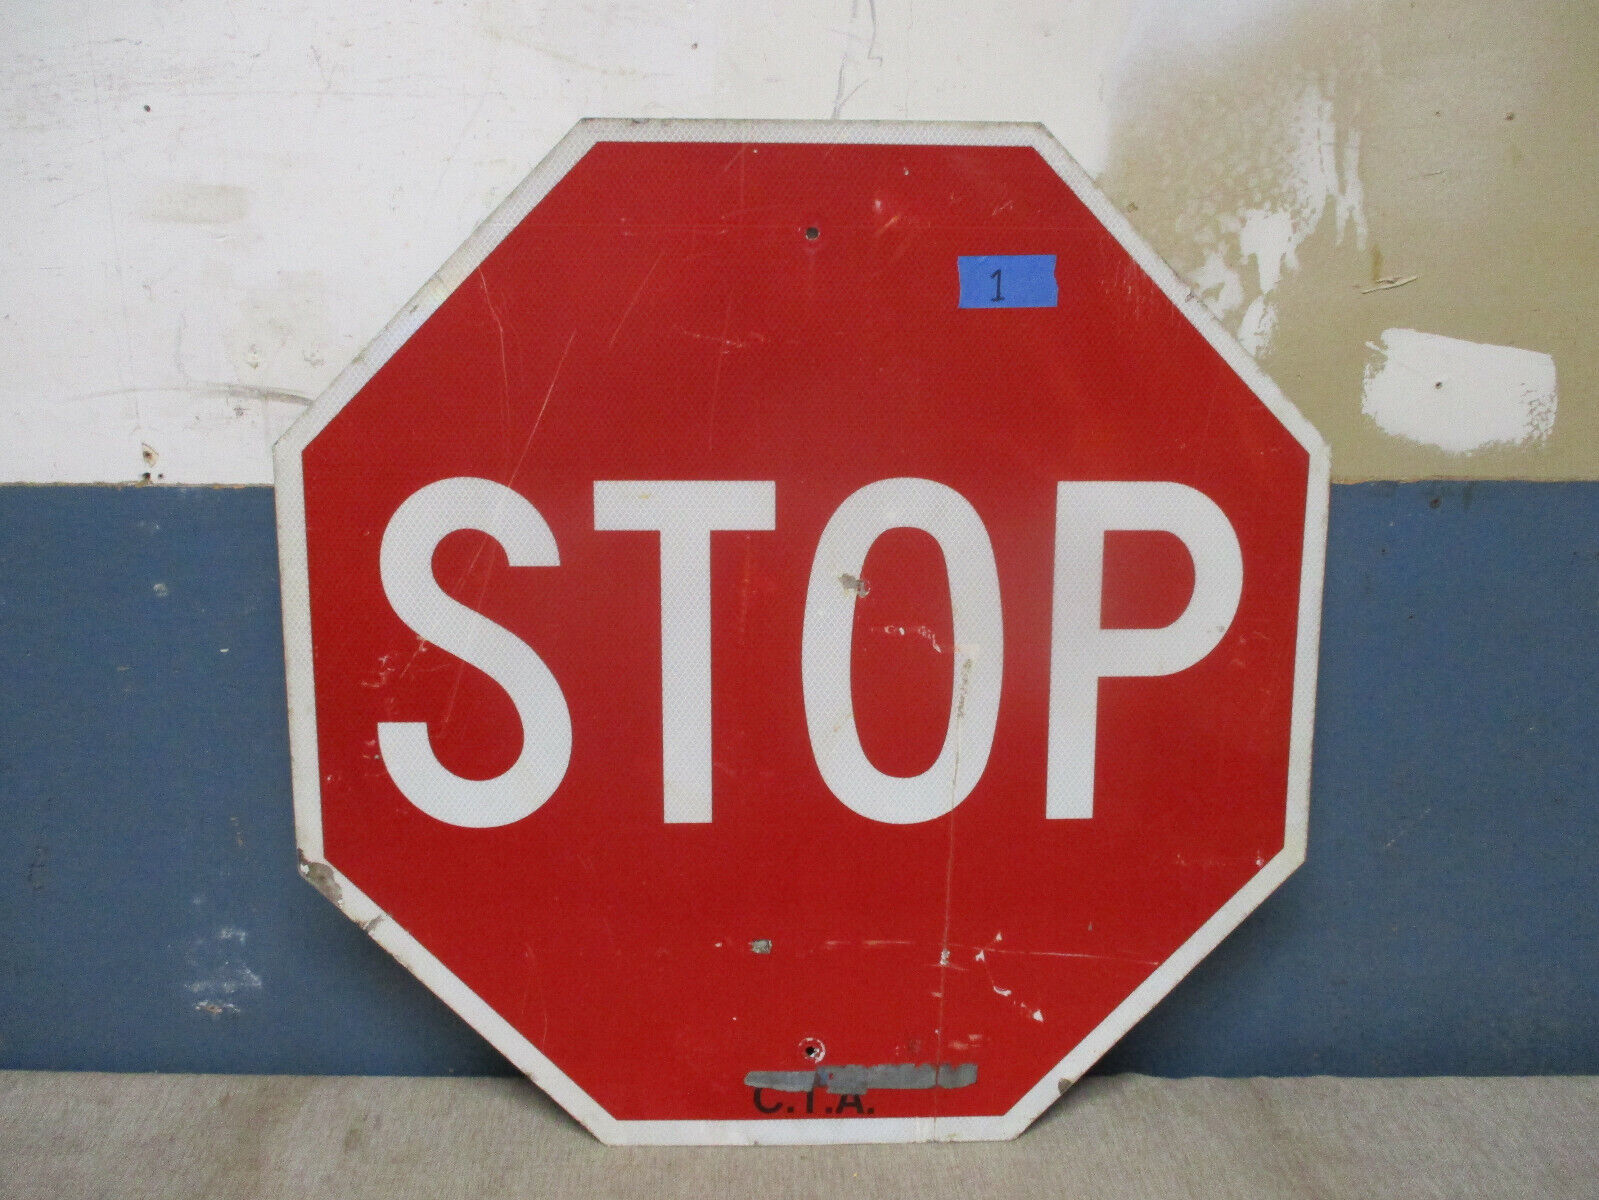 Authentic Retired “STOP” Highway Street Sign  30” Man Cave Garage Decor